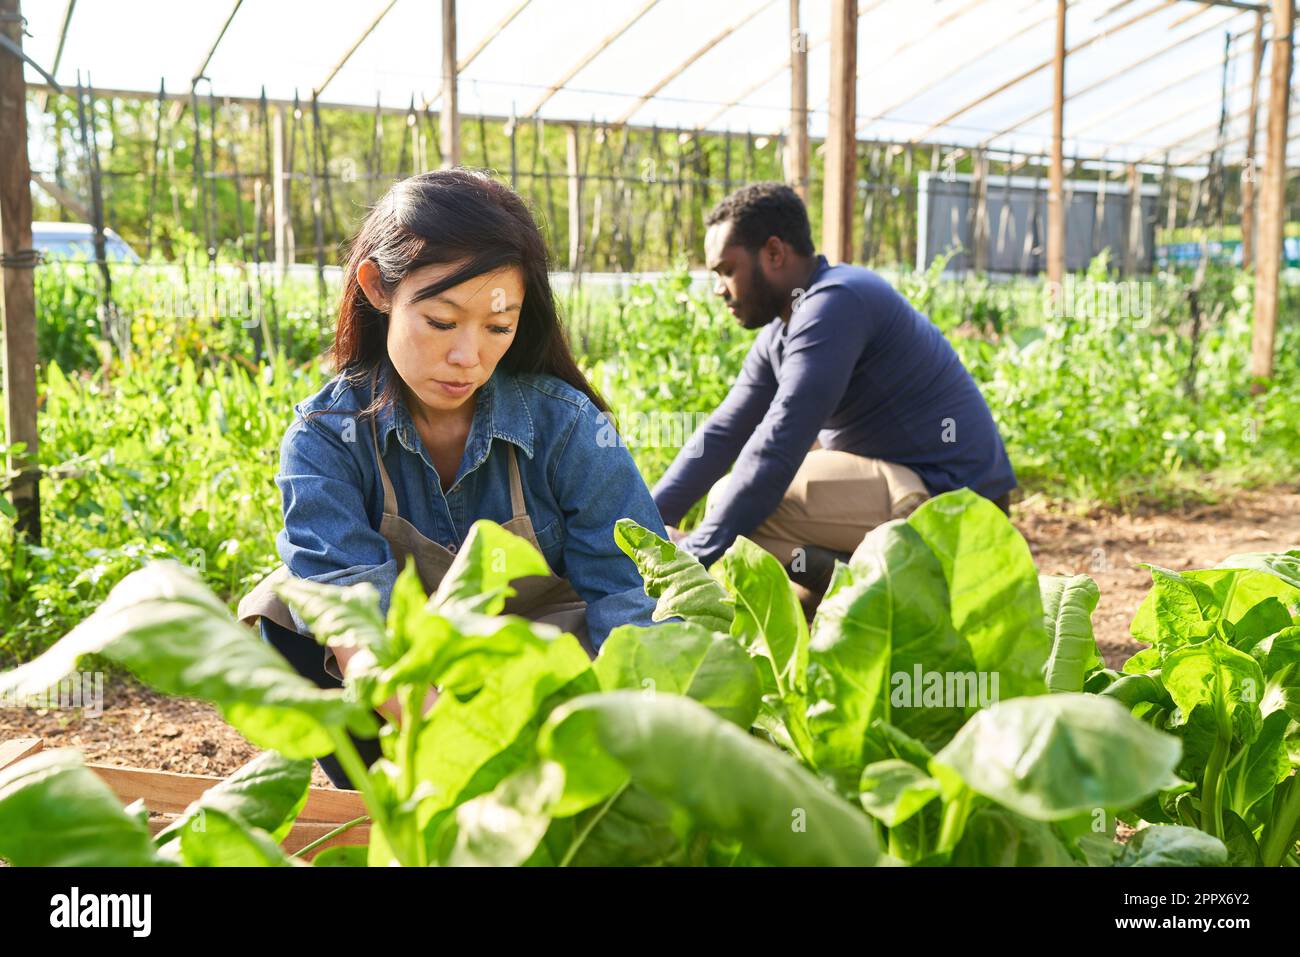 Female farmer harvesting fresh spinach with male coworker in background at greenhouse on sunny day Stock Photo